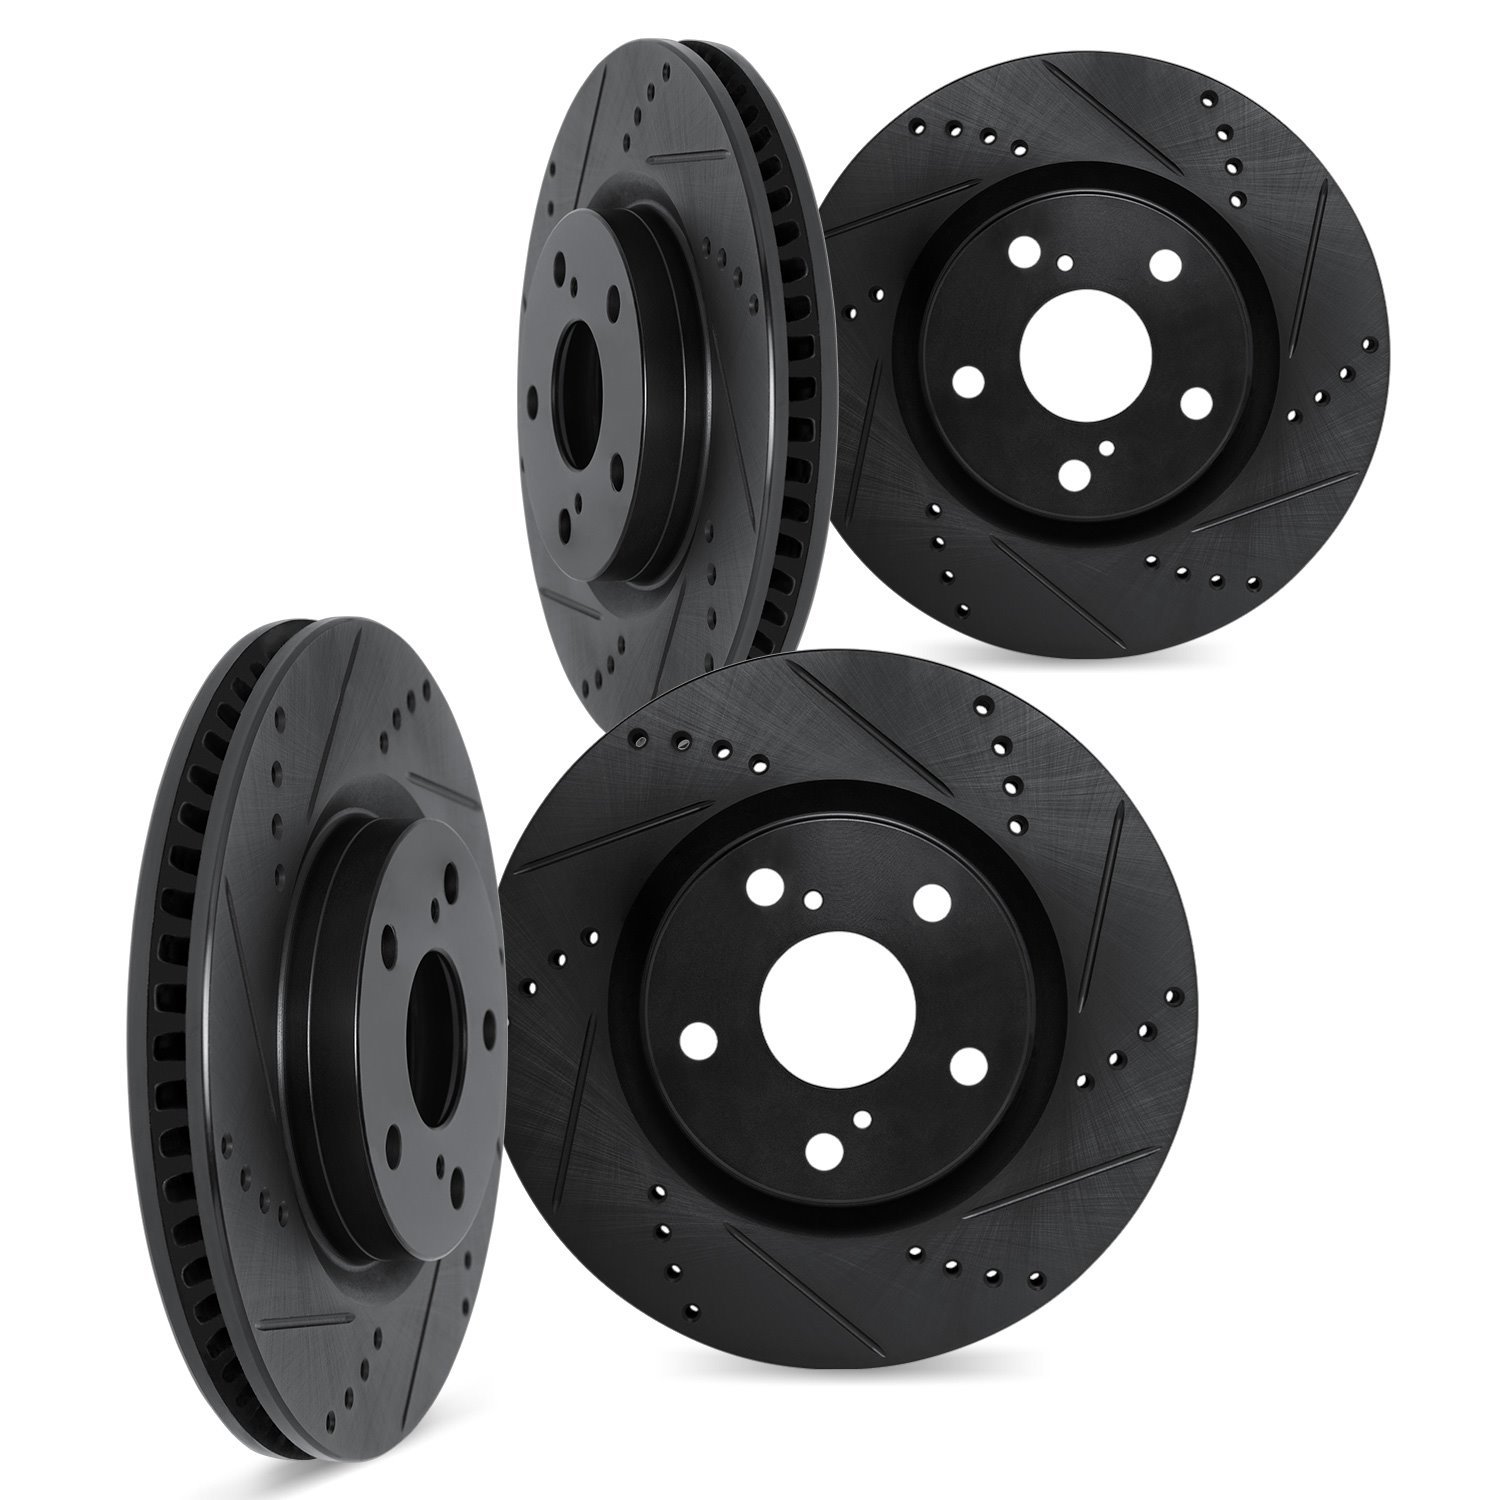 8004-02015 Drilled/Slotted Brake Rotors [Black], 1986-1991 Porsche, Position: Front and Rear